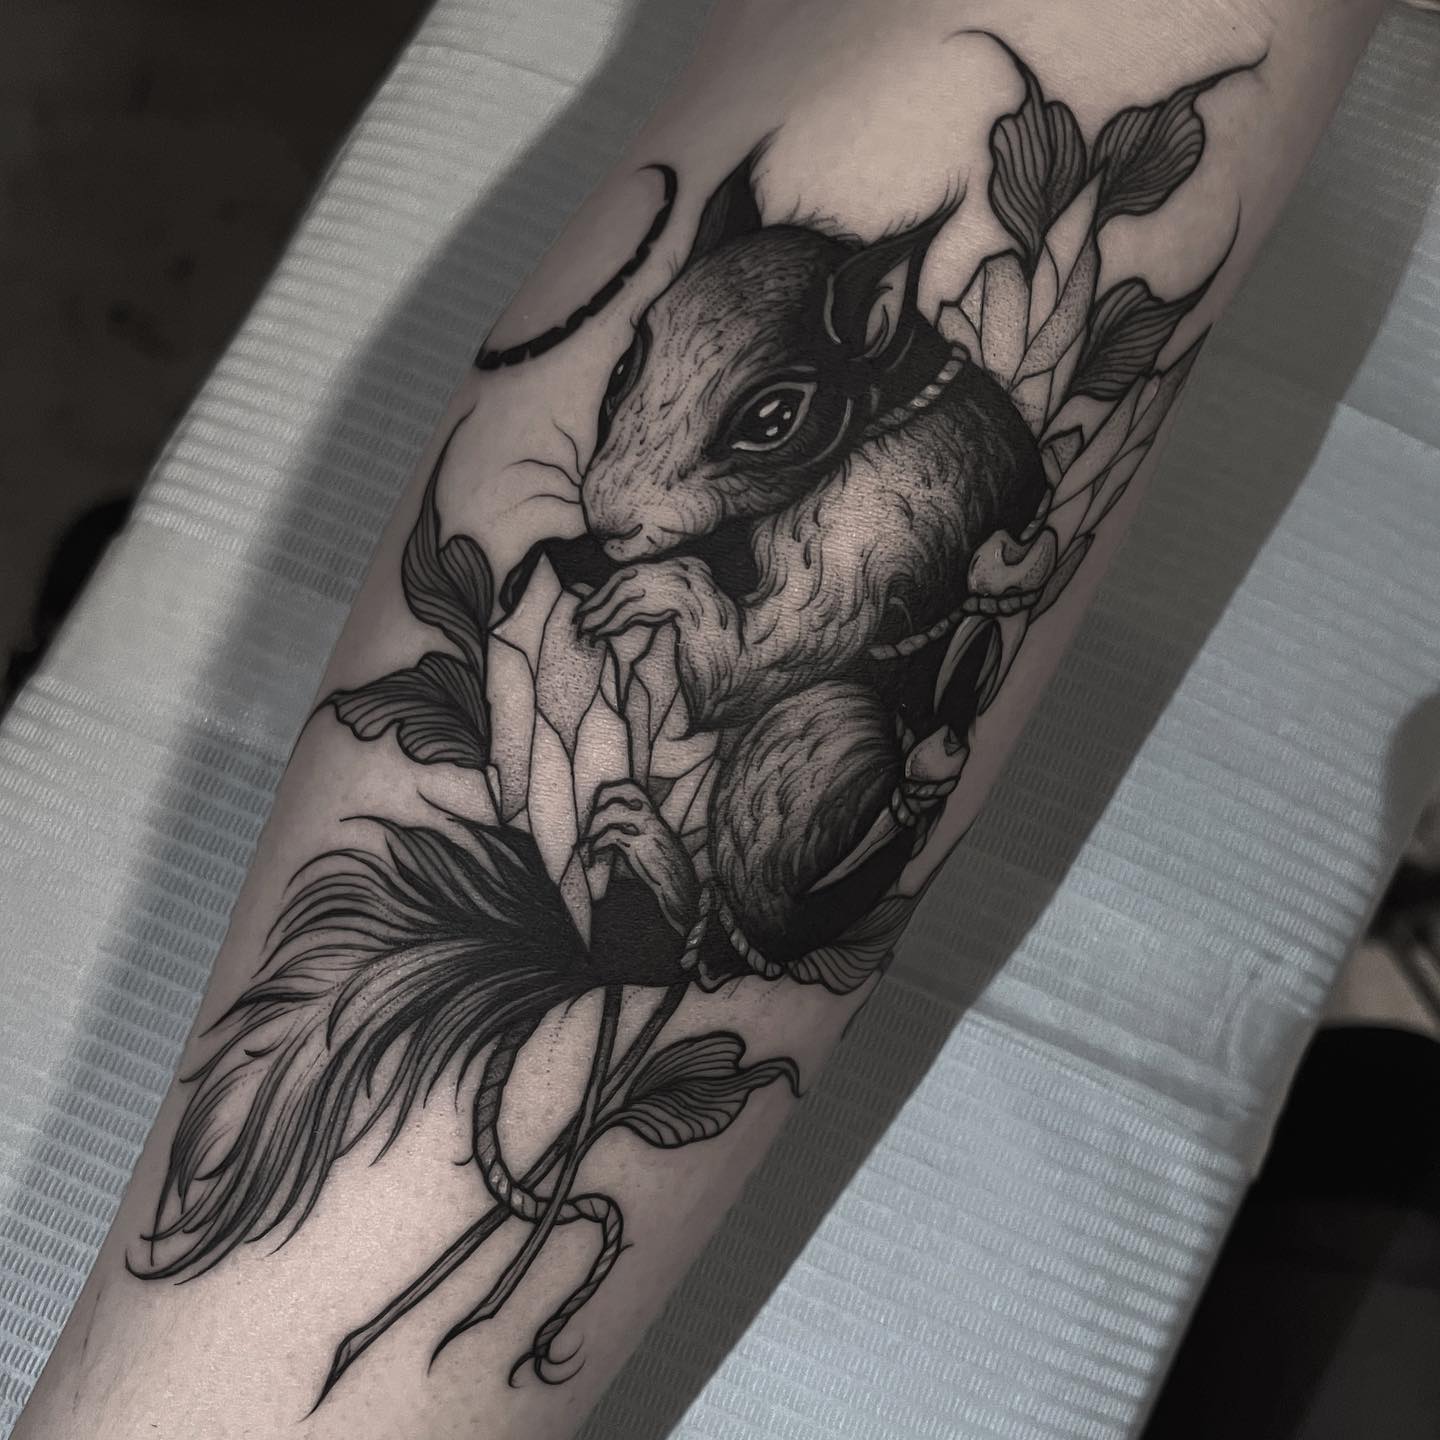 Black squirrel tattoo by steph.guillotine